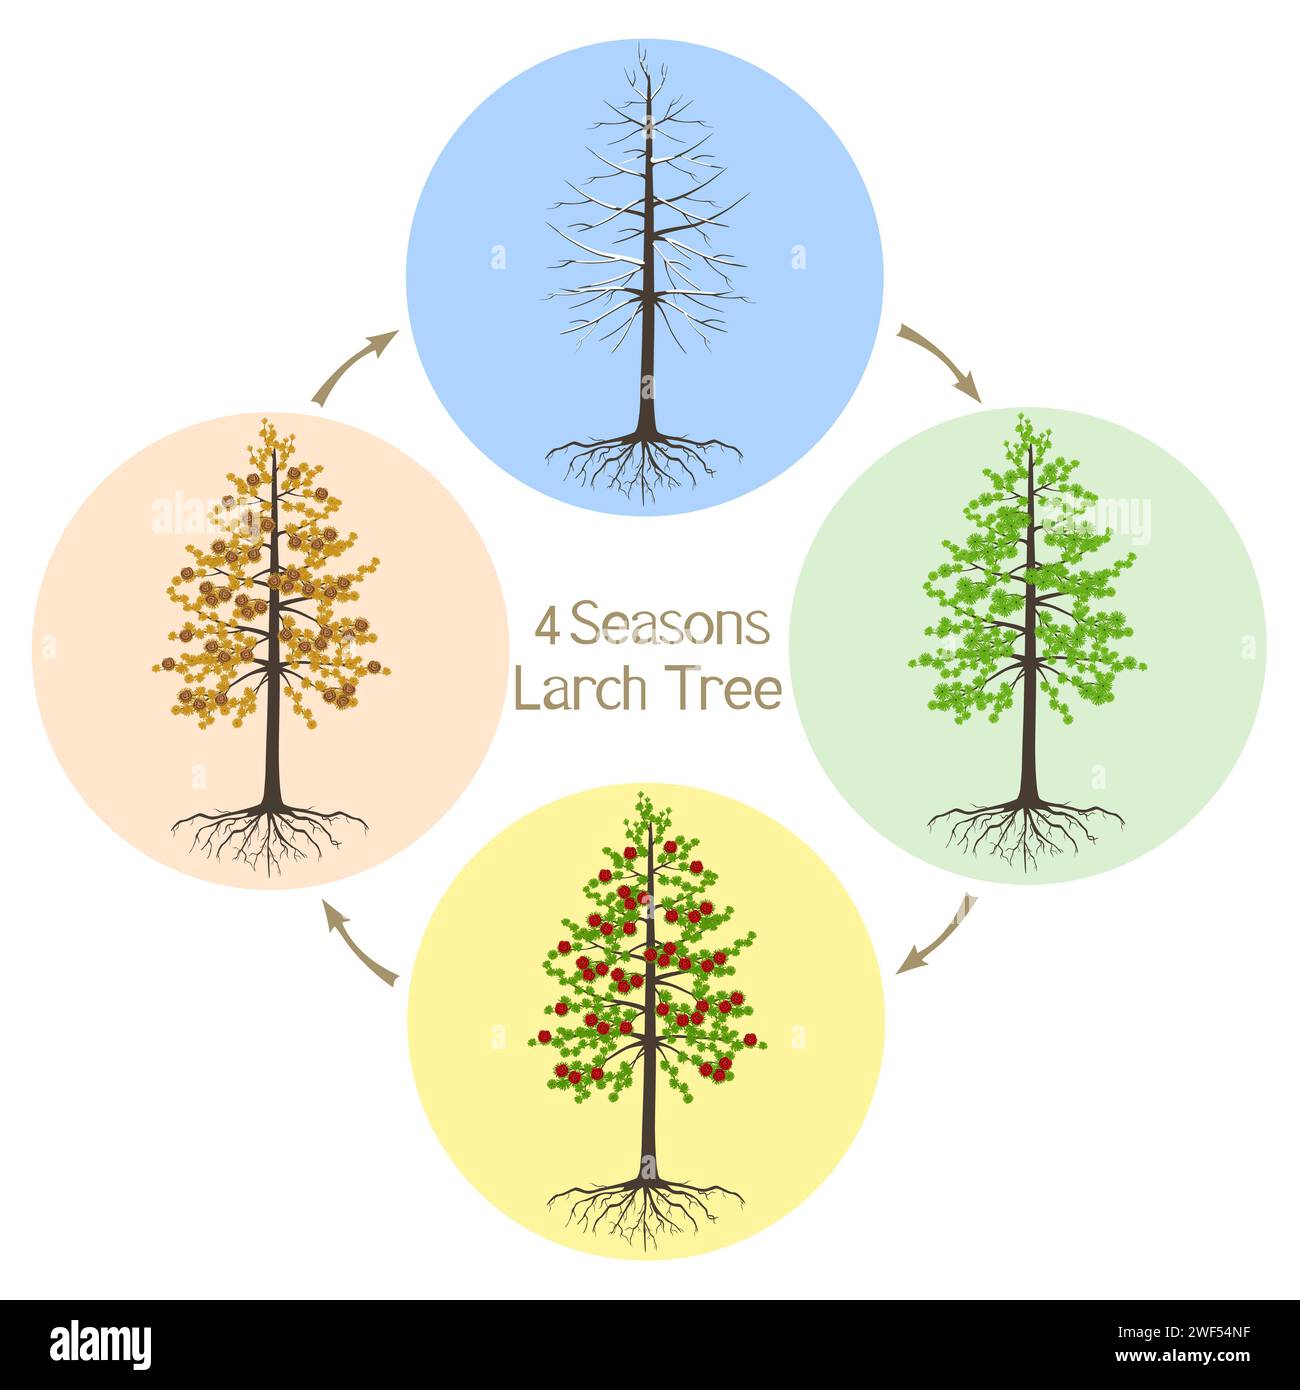 Four seasons dahurian gmelin larch tree on a white background. Stock Vector